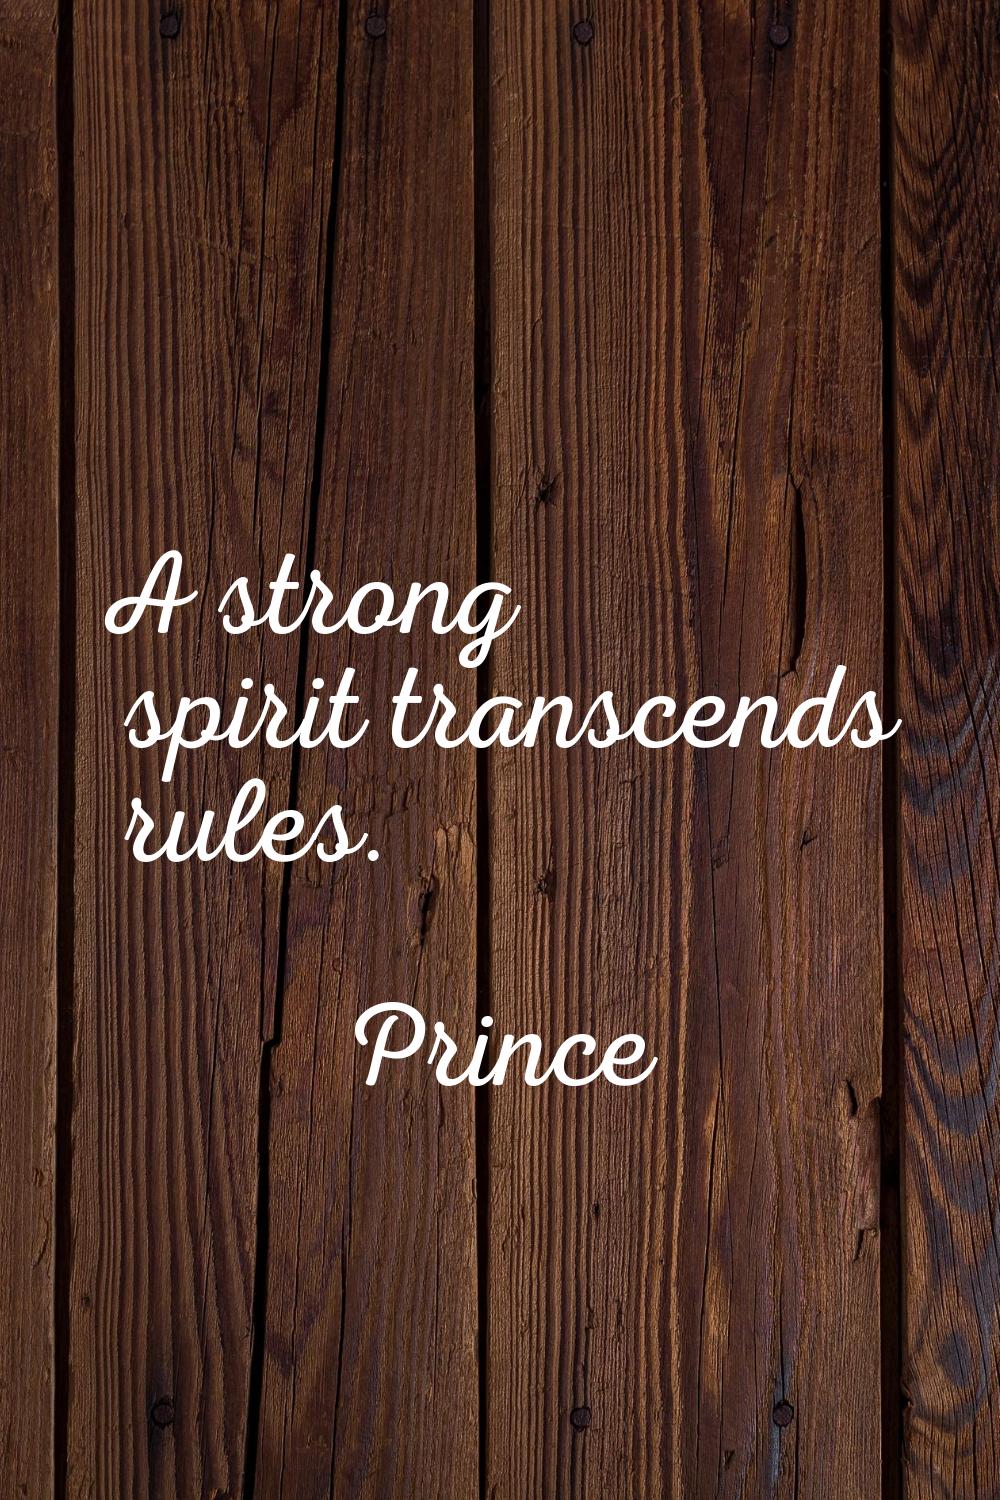 A strong spirit transcends rules.